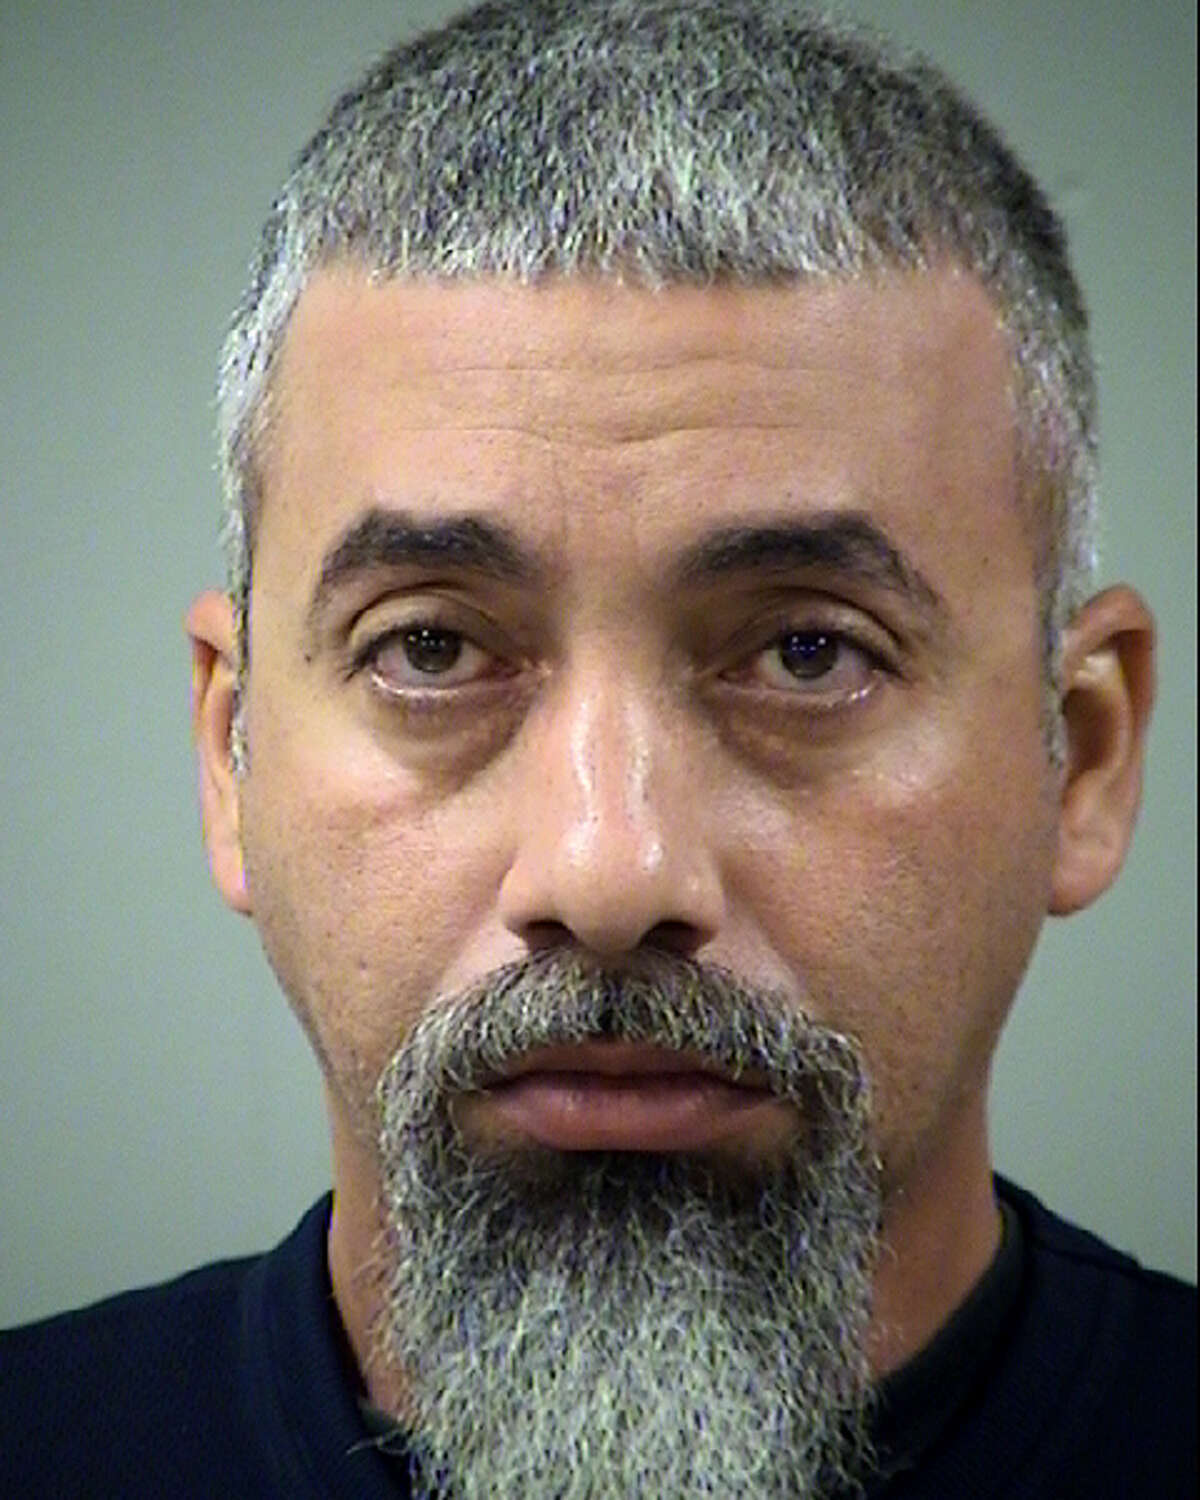 Mariano Talavera, 38, was arrested after allegedly trespassing at a local mosque.